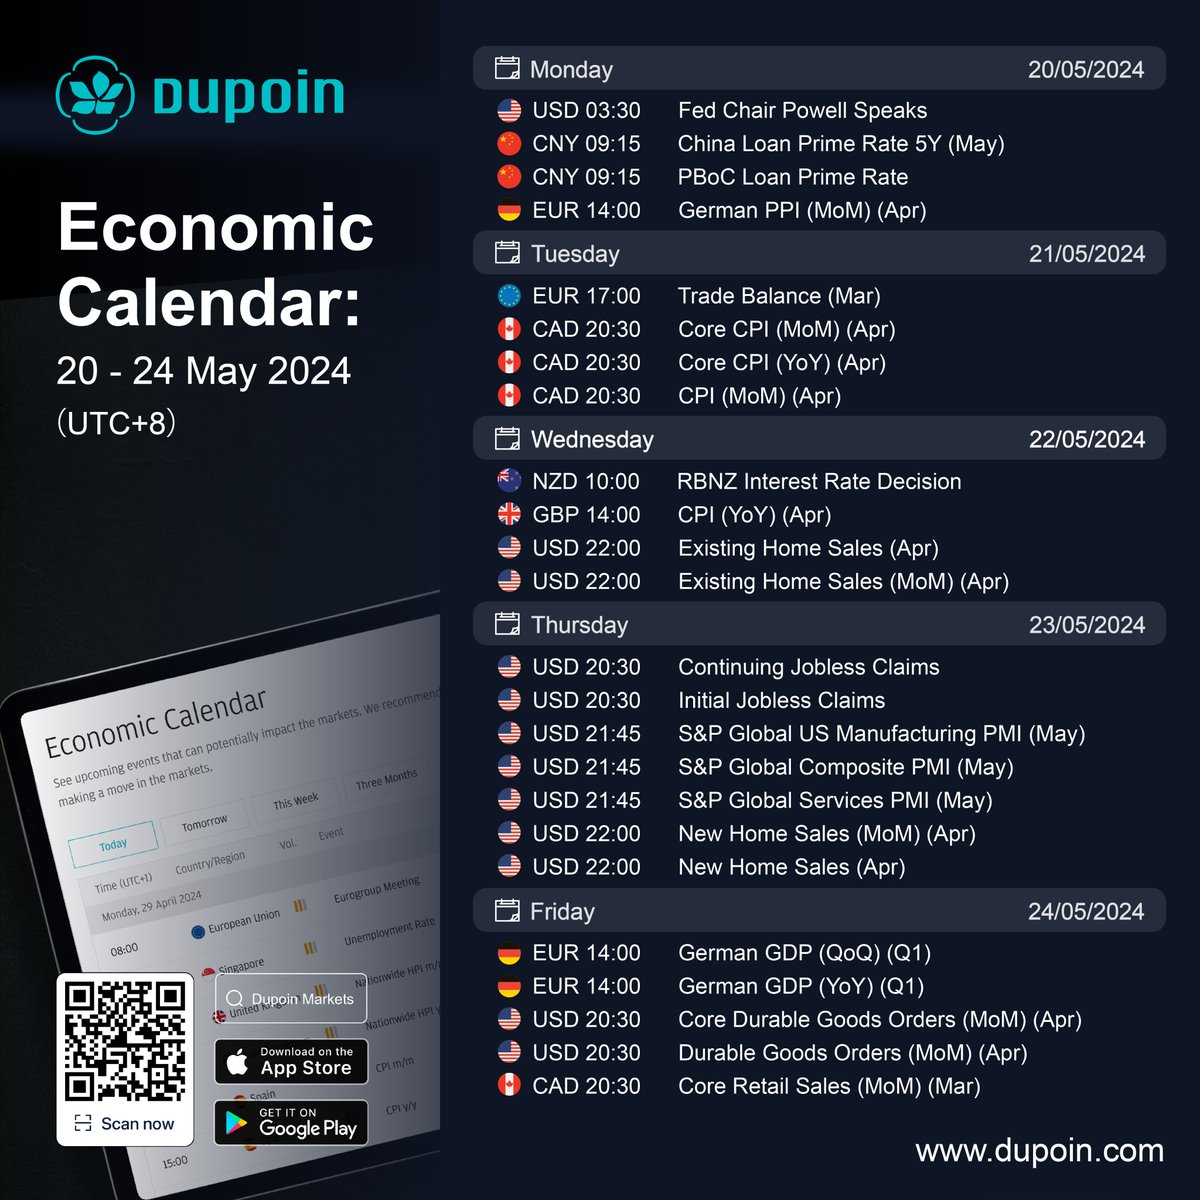 🗓️ Don't miss out on market movers! Stay alert for upcoming events📢  

Bookmark for quick reference and tap the link in bio for more. 🔗  
#Dupoin #EconomicCalendar #StayInformed #Trading